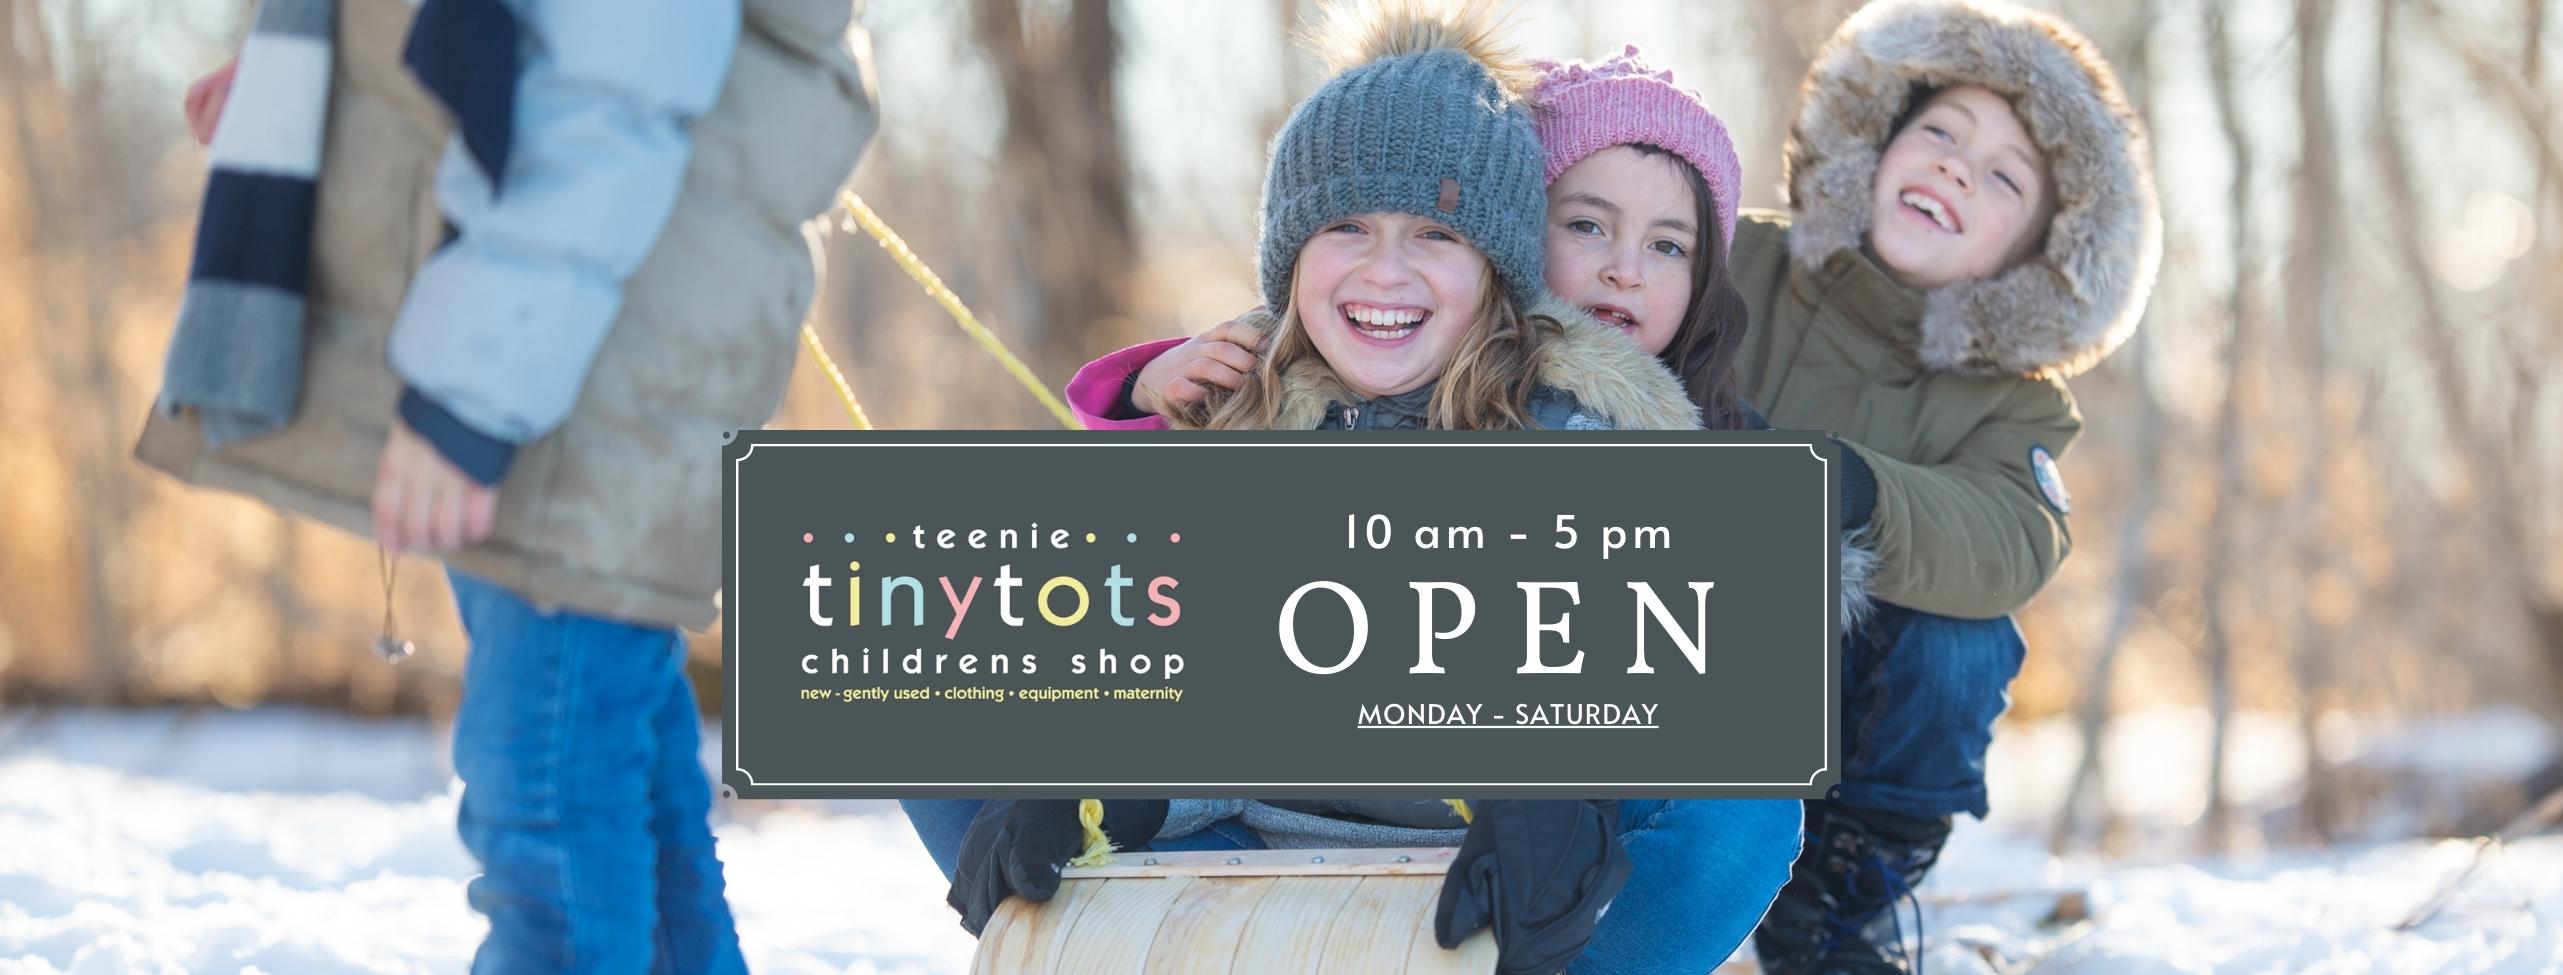 Teenie Tiny Tots Children's Shop Hours are Monday to Saturday 10 - 5. Palmerston open late on Thursdays